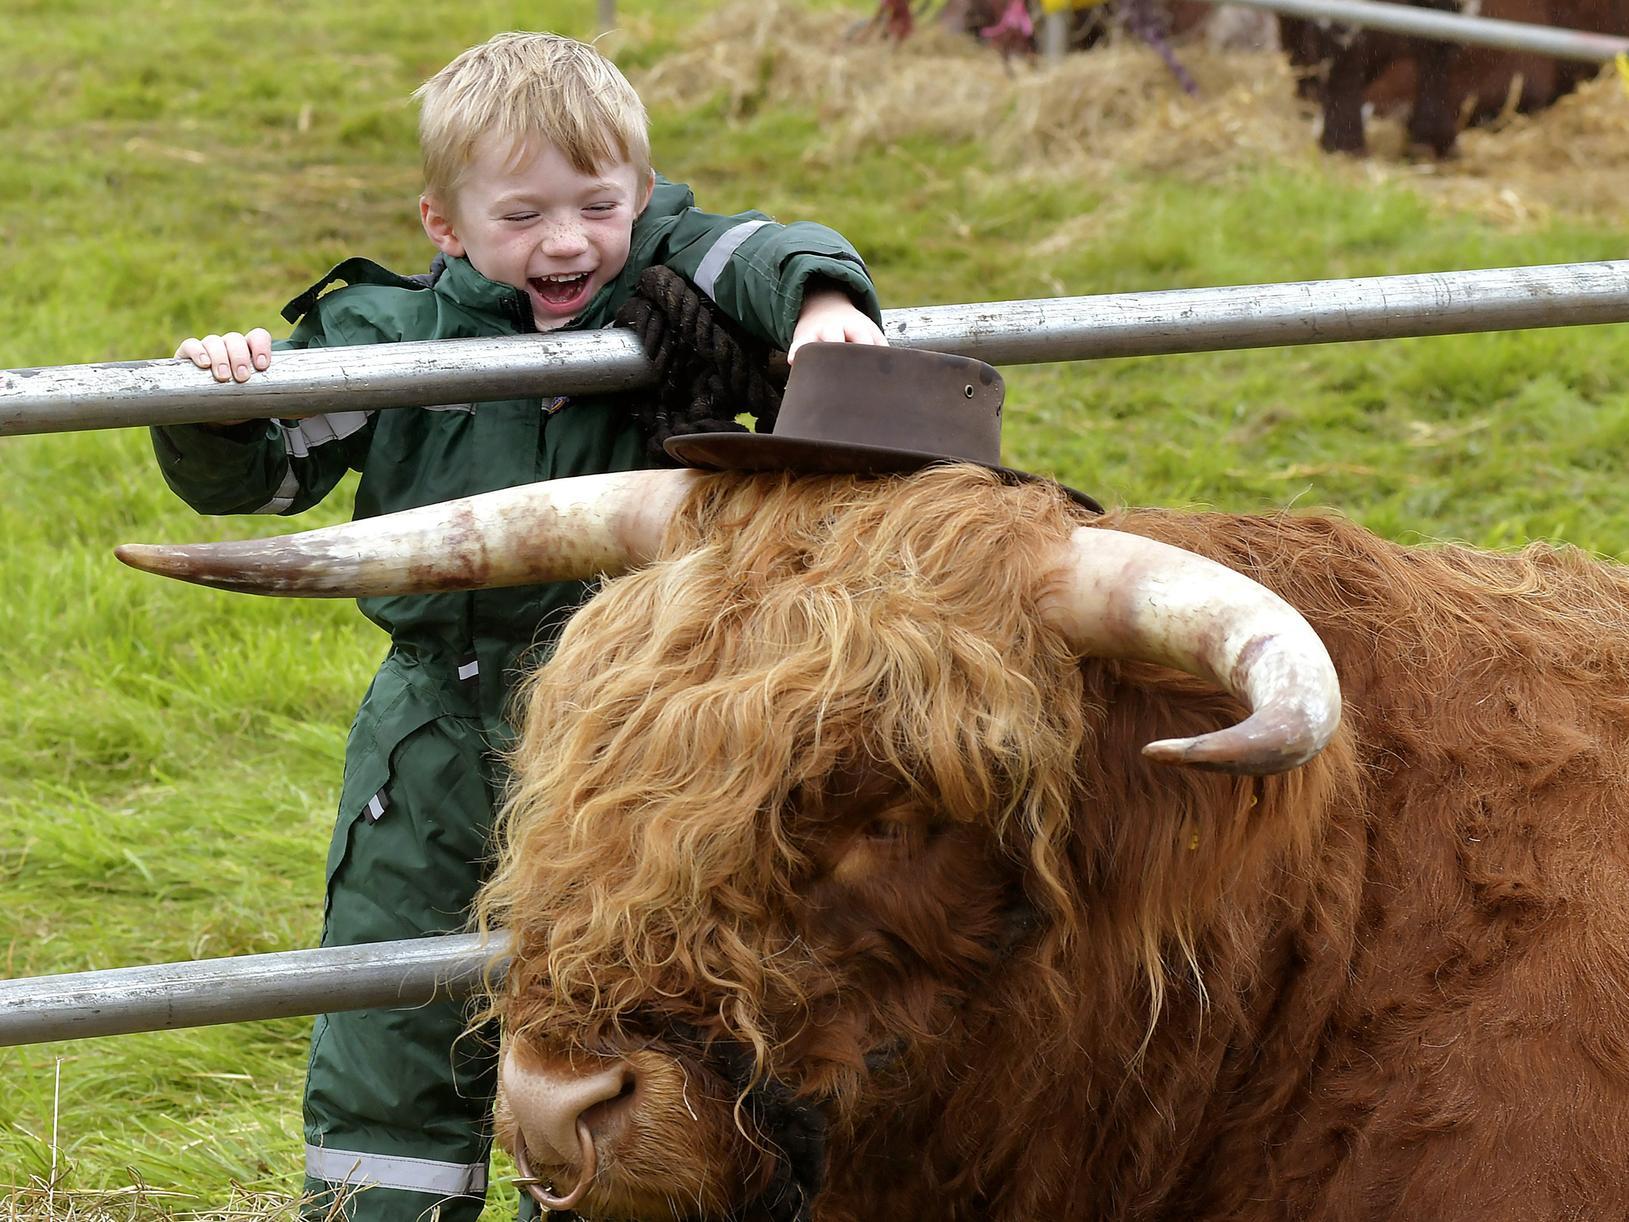 Isaac Lumley presents his hat to a Highland Bull at Danby Show. Photo: Richard Ponter